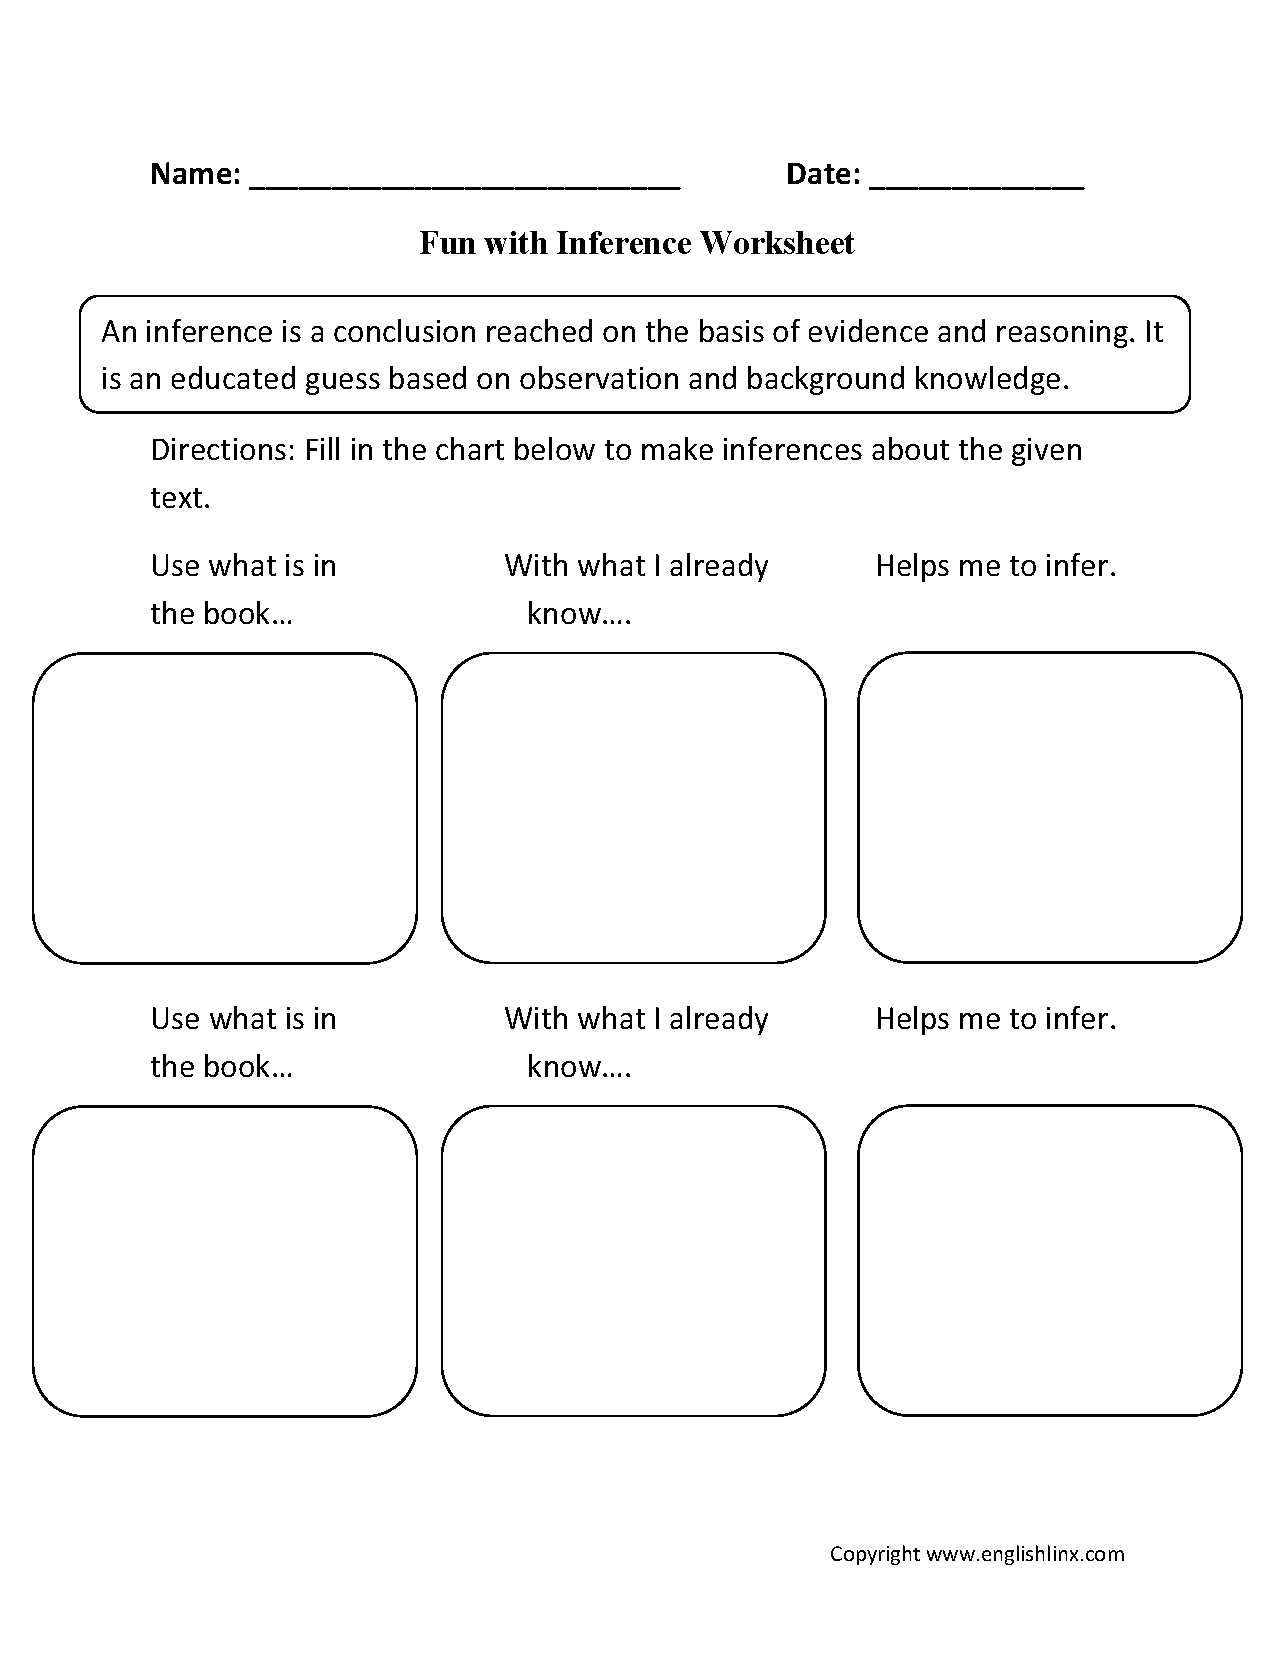 Skills Worksheet Directed Reading together with Fun with Inference Worksheets Inference Lessons